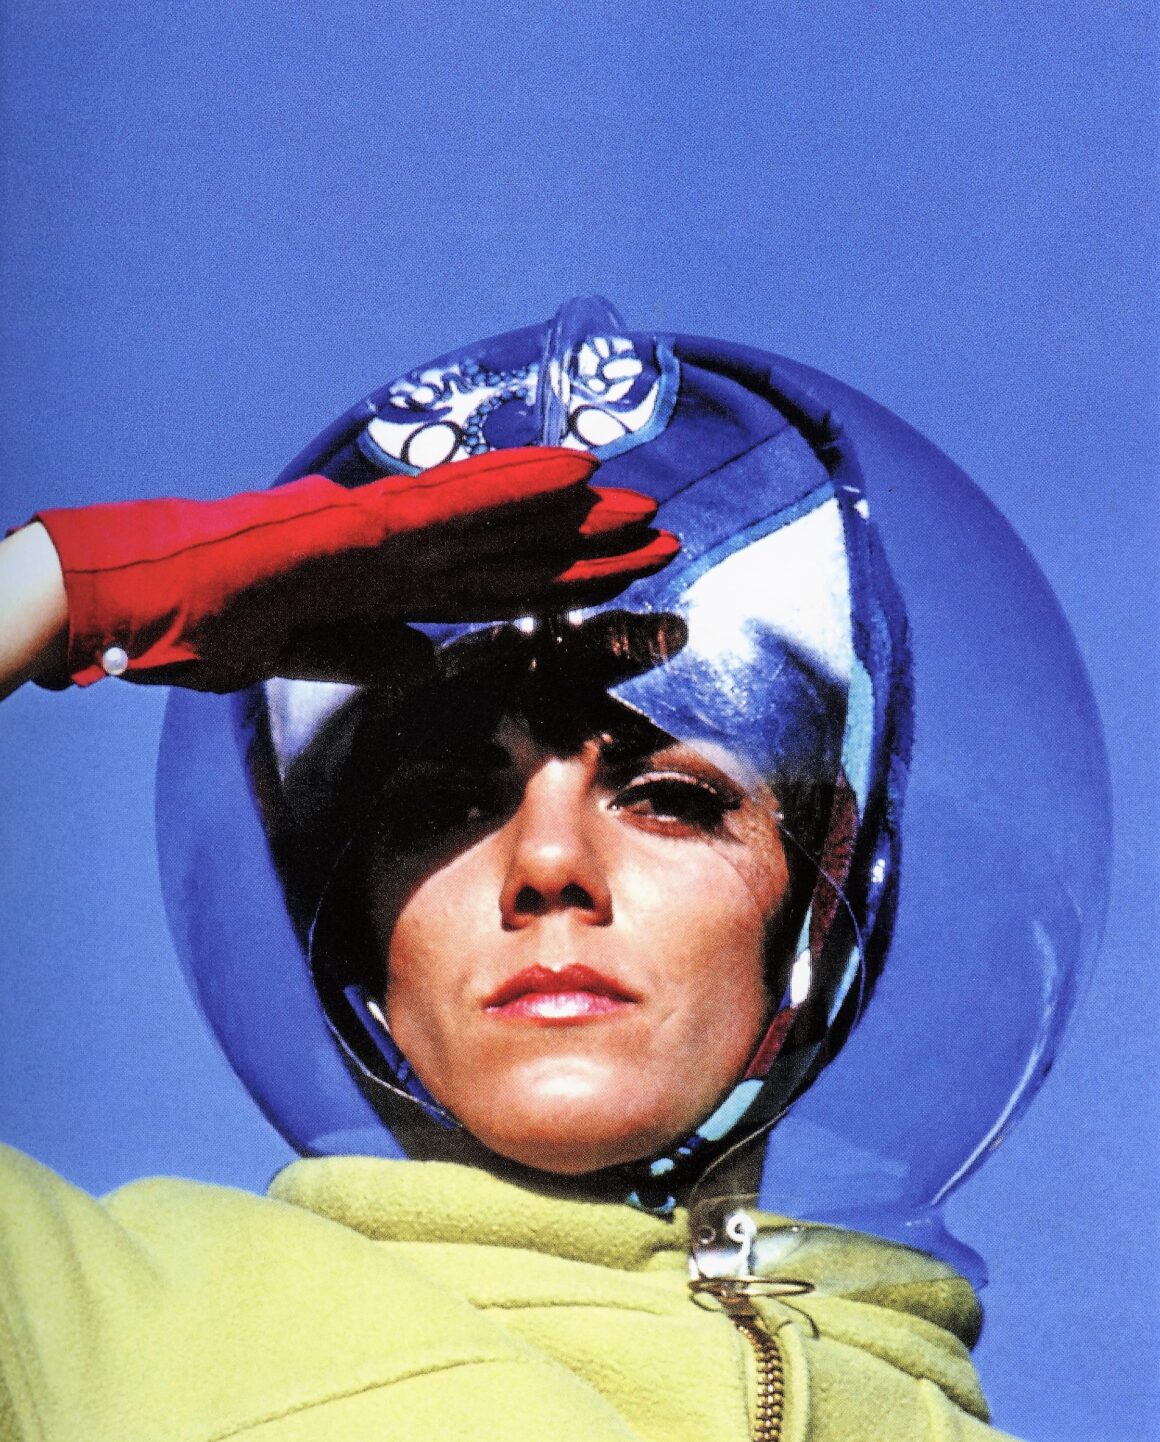 The flight attendant uniform included a space bubble hat, called the Raindome, to protect against inclement weather. Photo courtesy of Airways Magazine